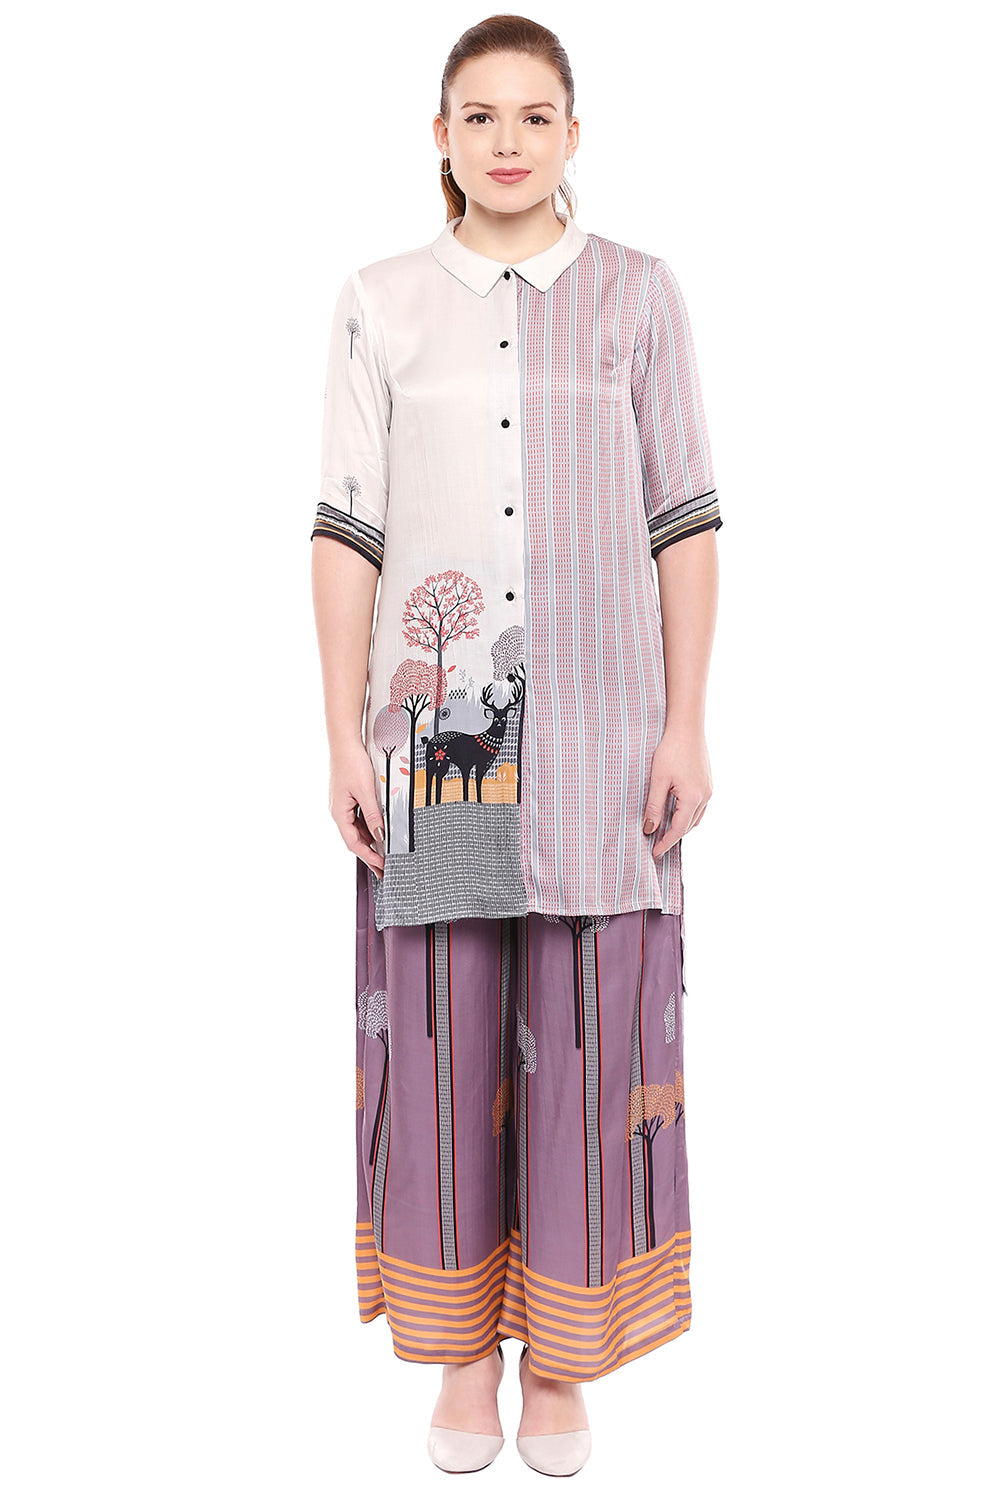 Tree Printed Kurta With Buttons In Front Paired With Printed Pants